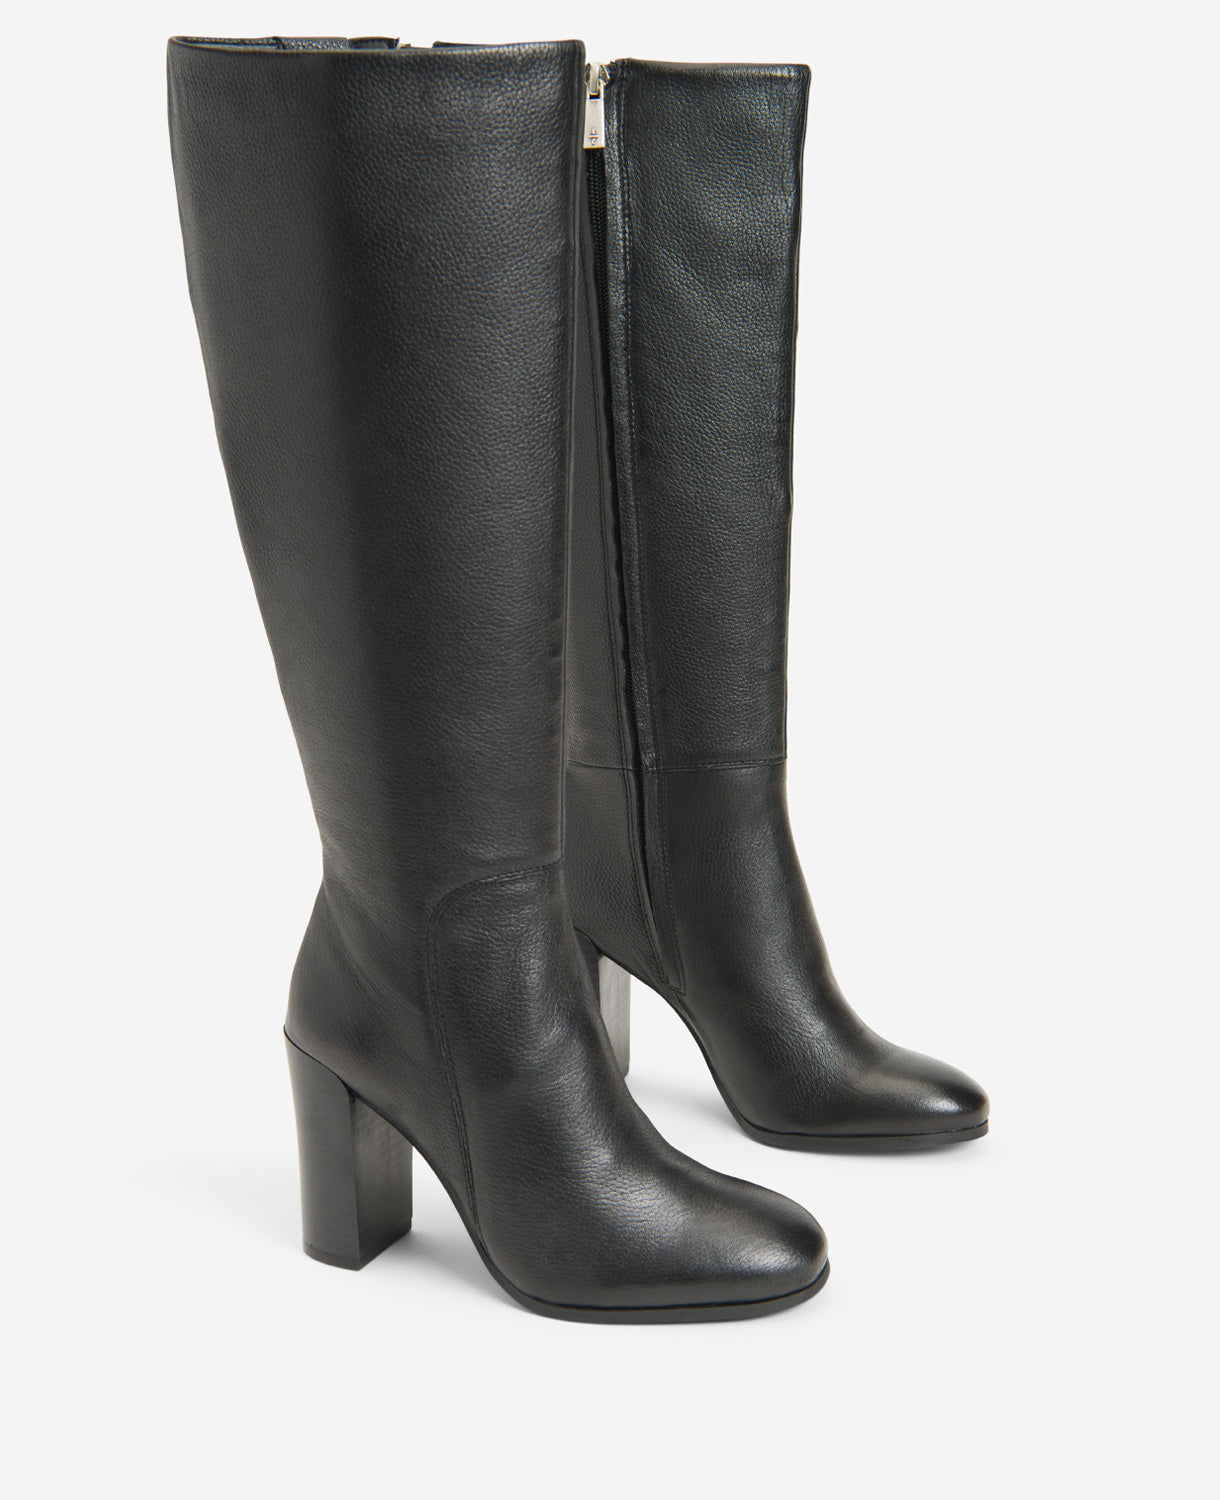 Kenneth Cole New York Riding Boots